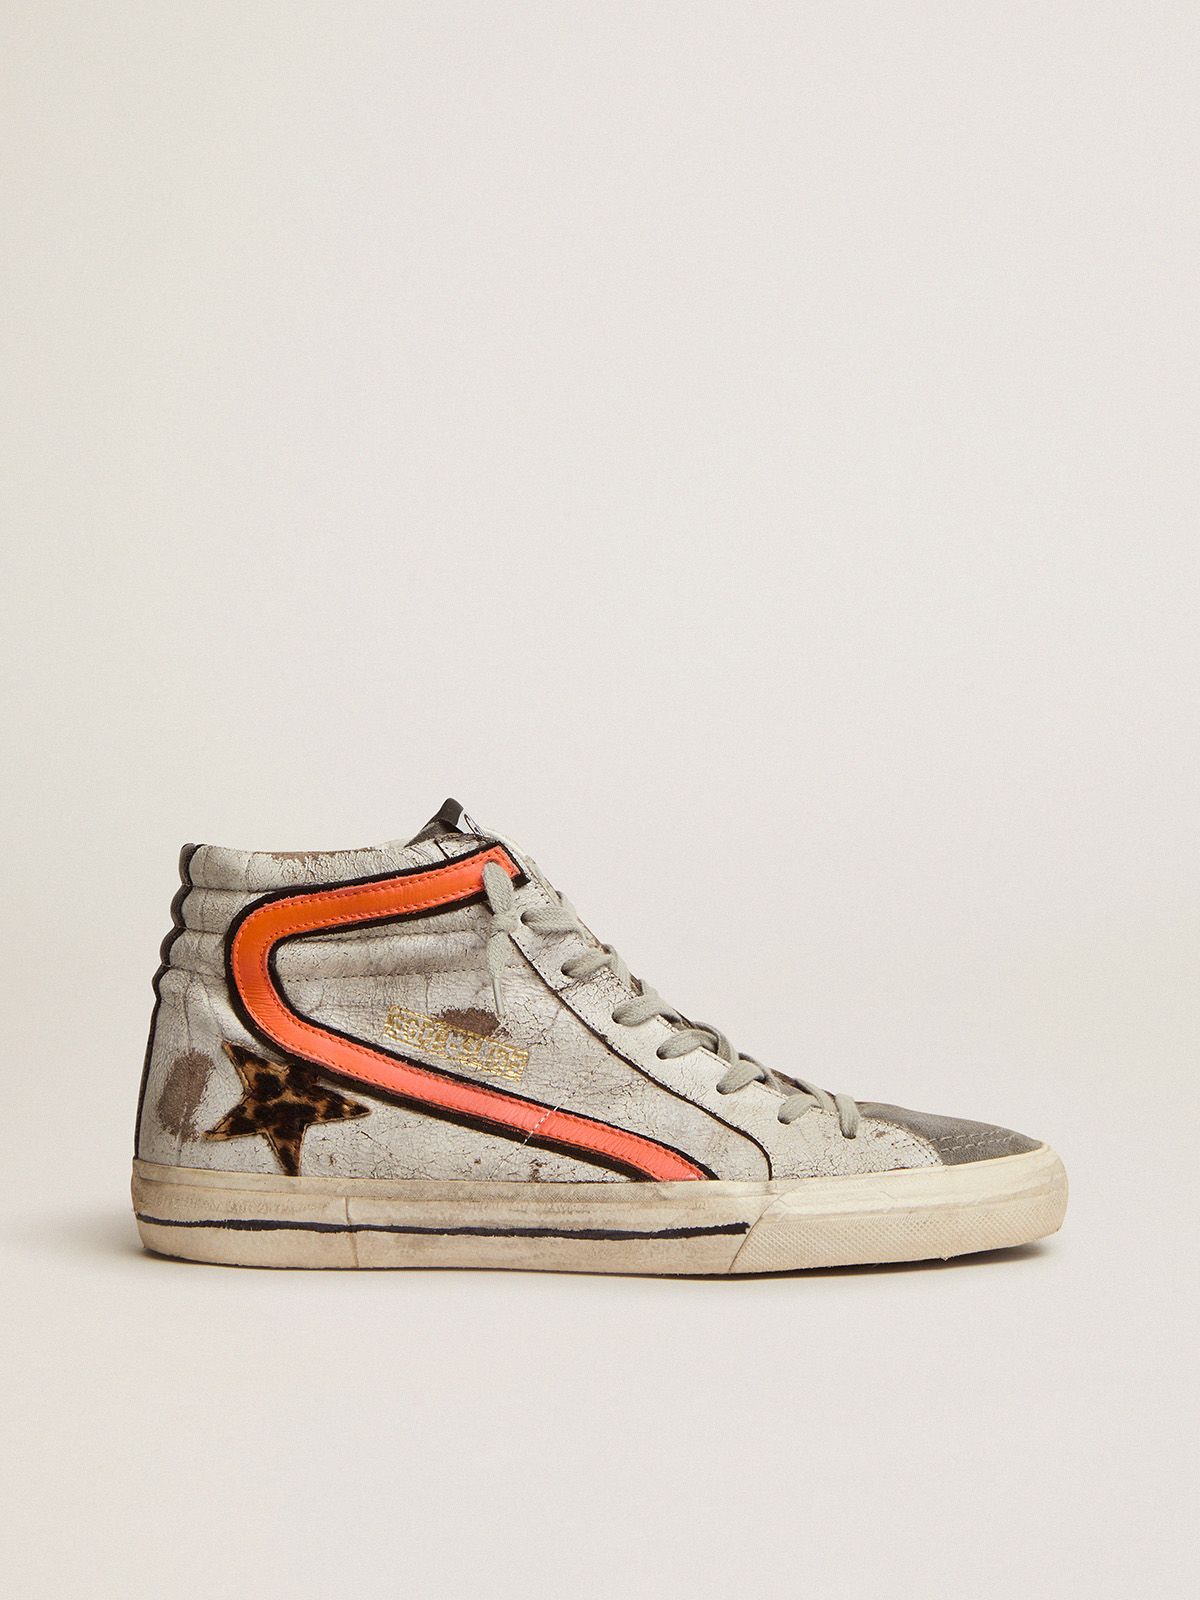 golden goose in Slide with star suede leopard-print sneakers crackled skin pony